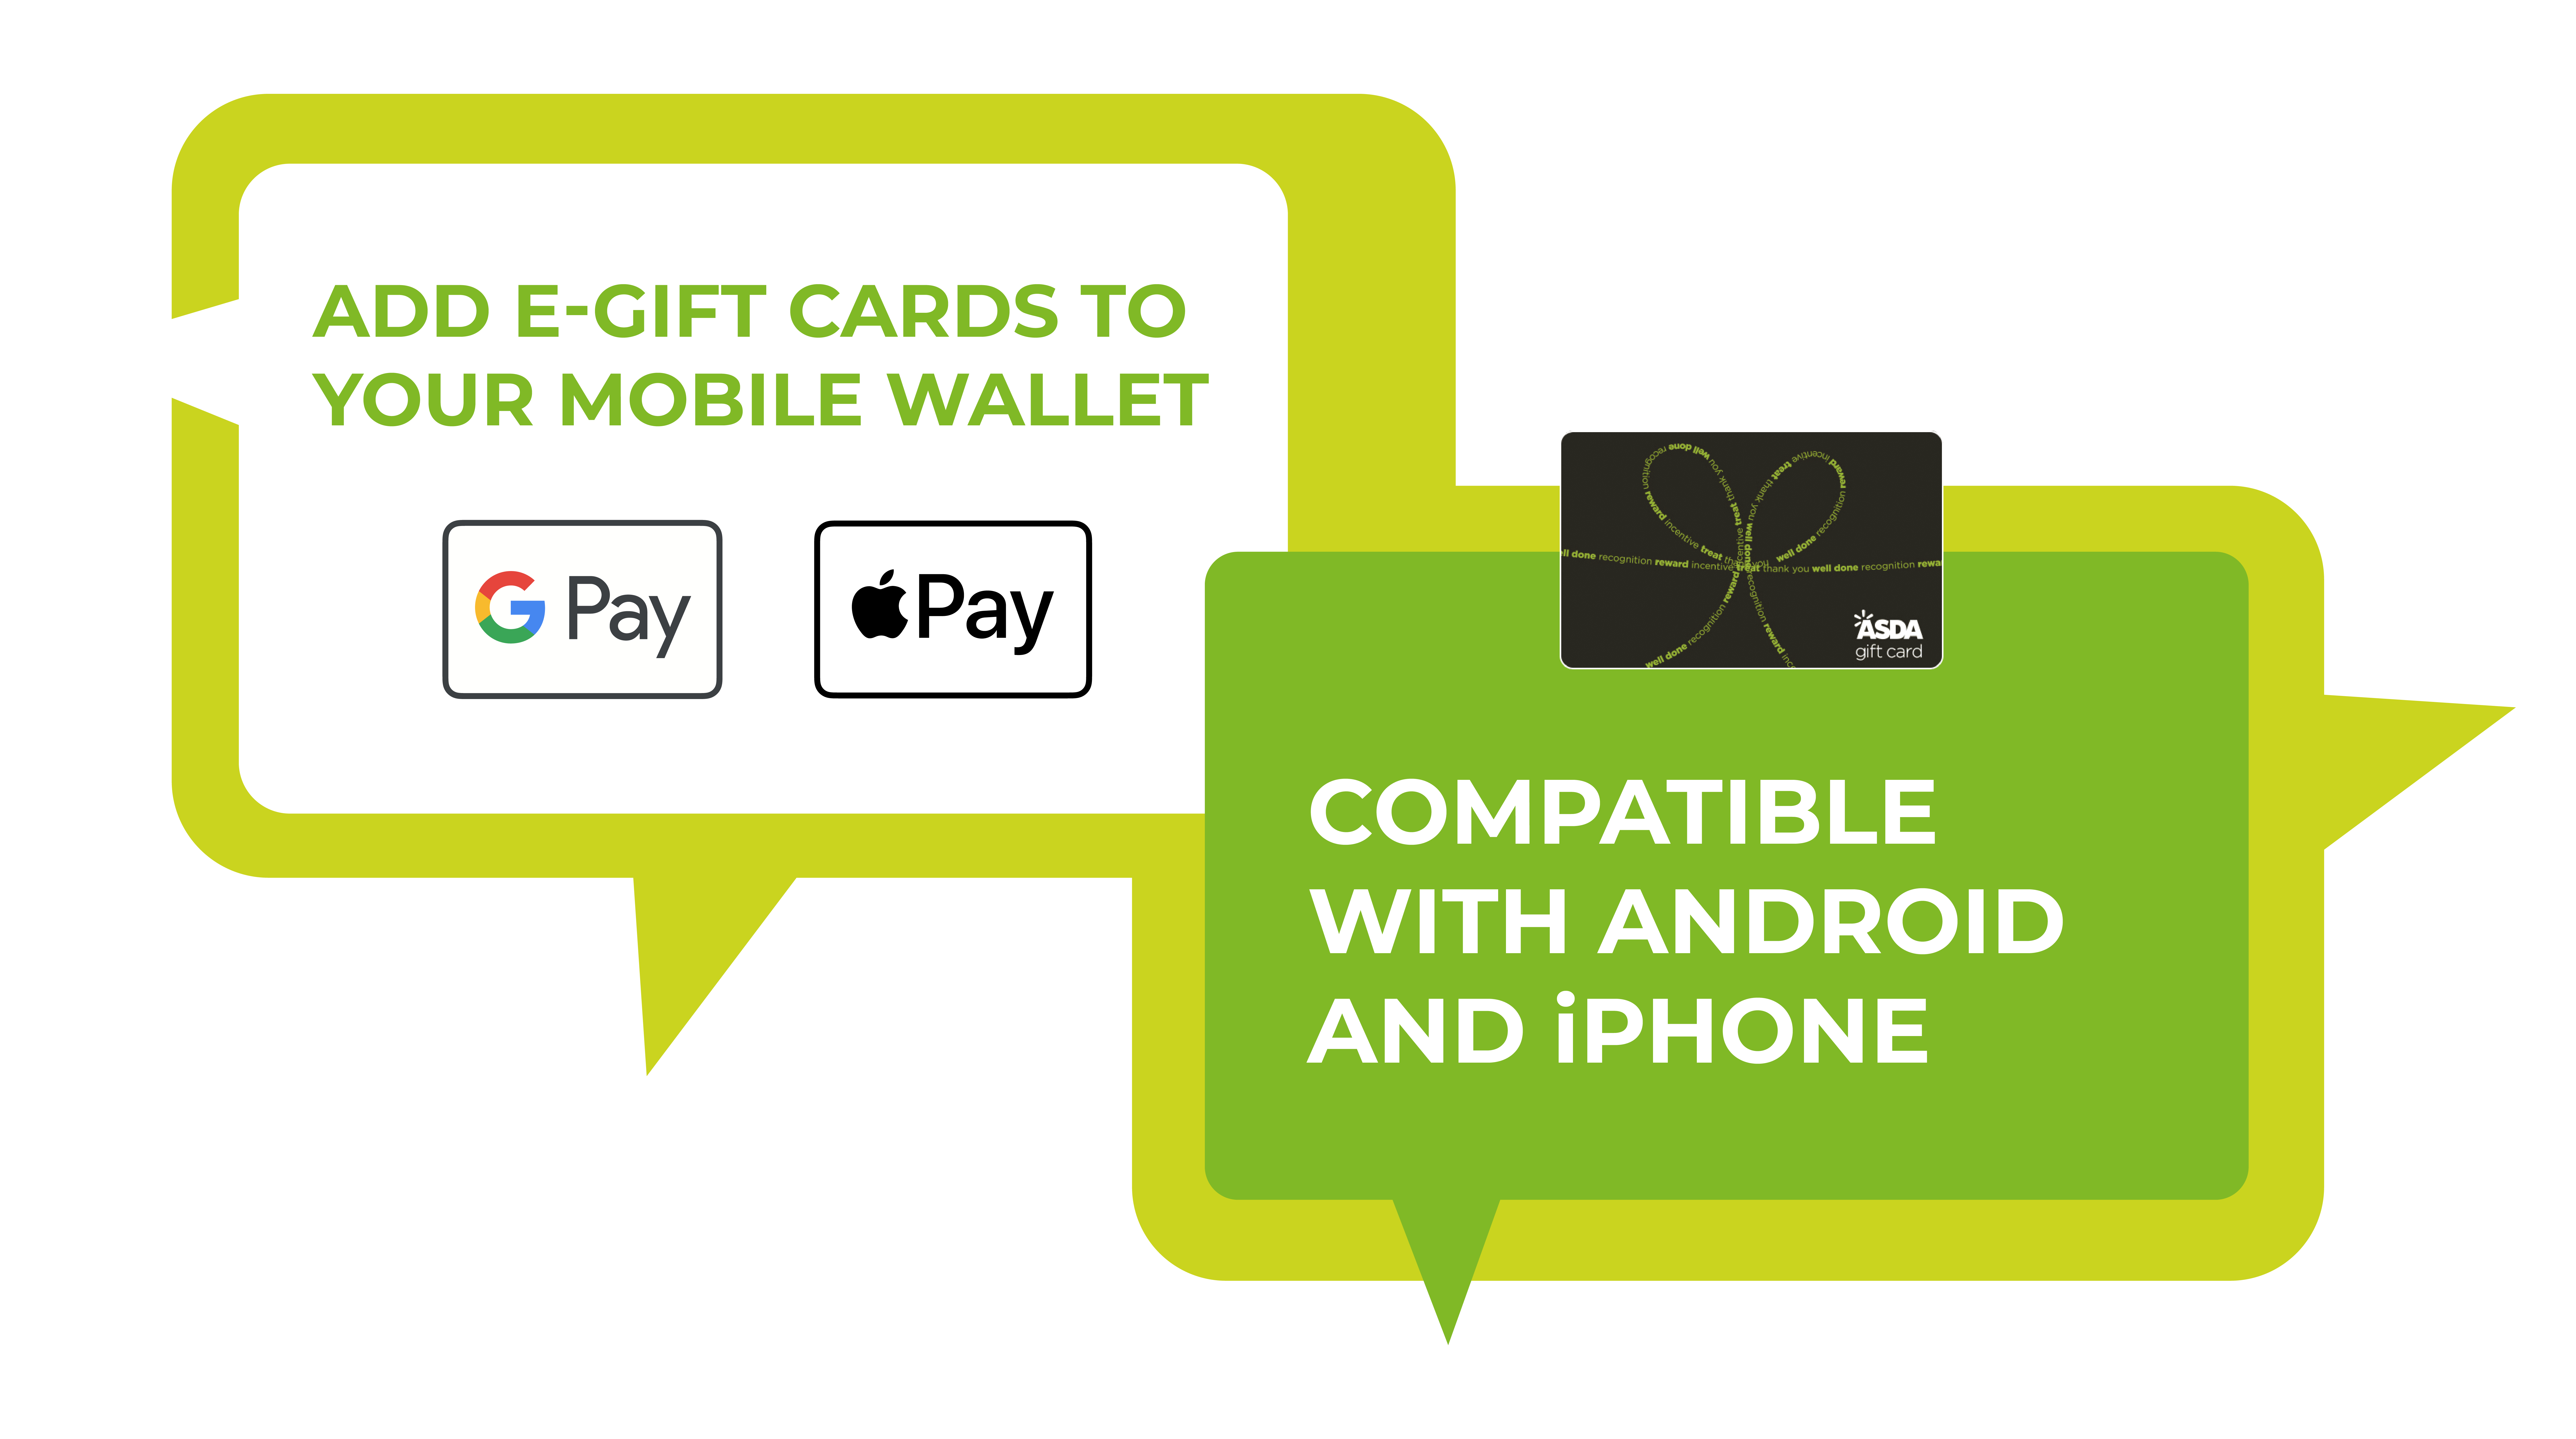 e-gift cards from Asda now Apple Pay and Google Pay compatible